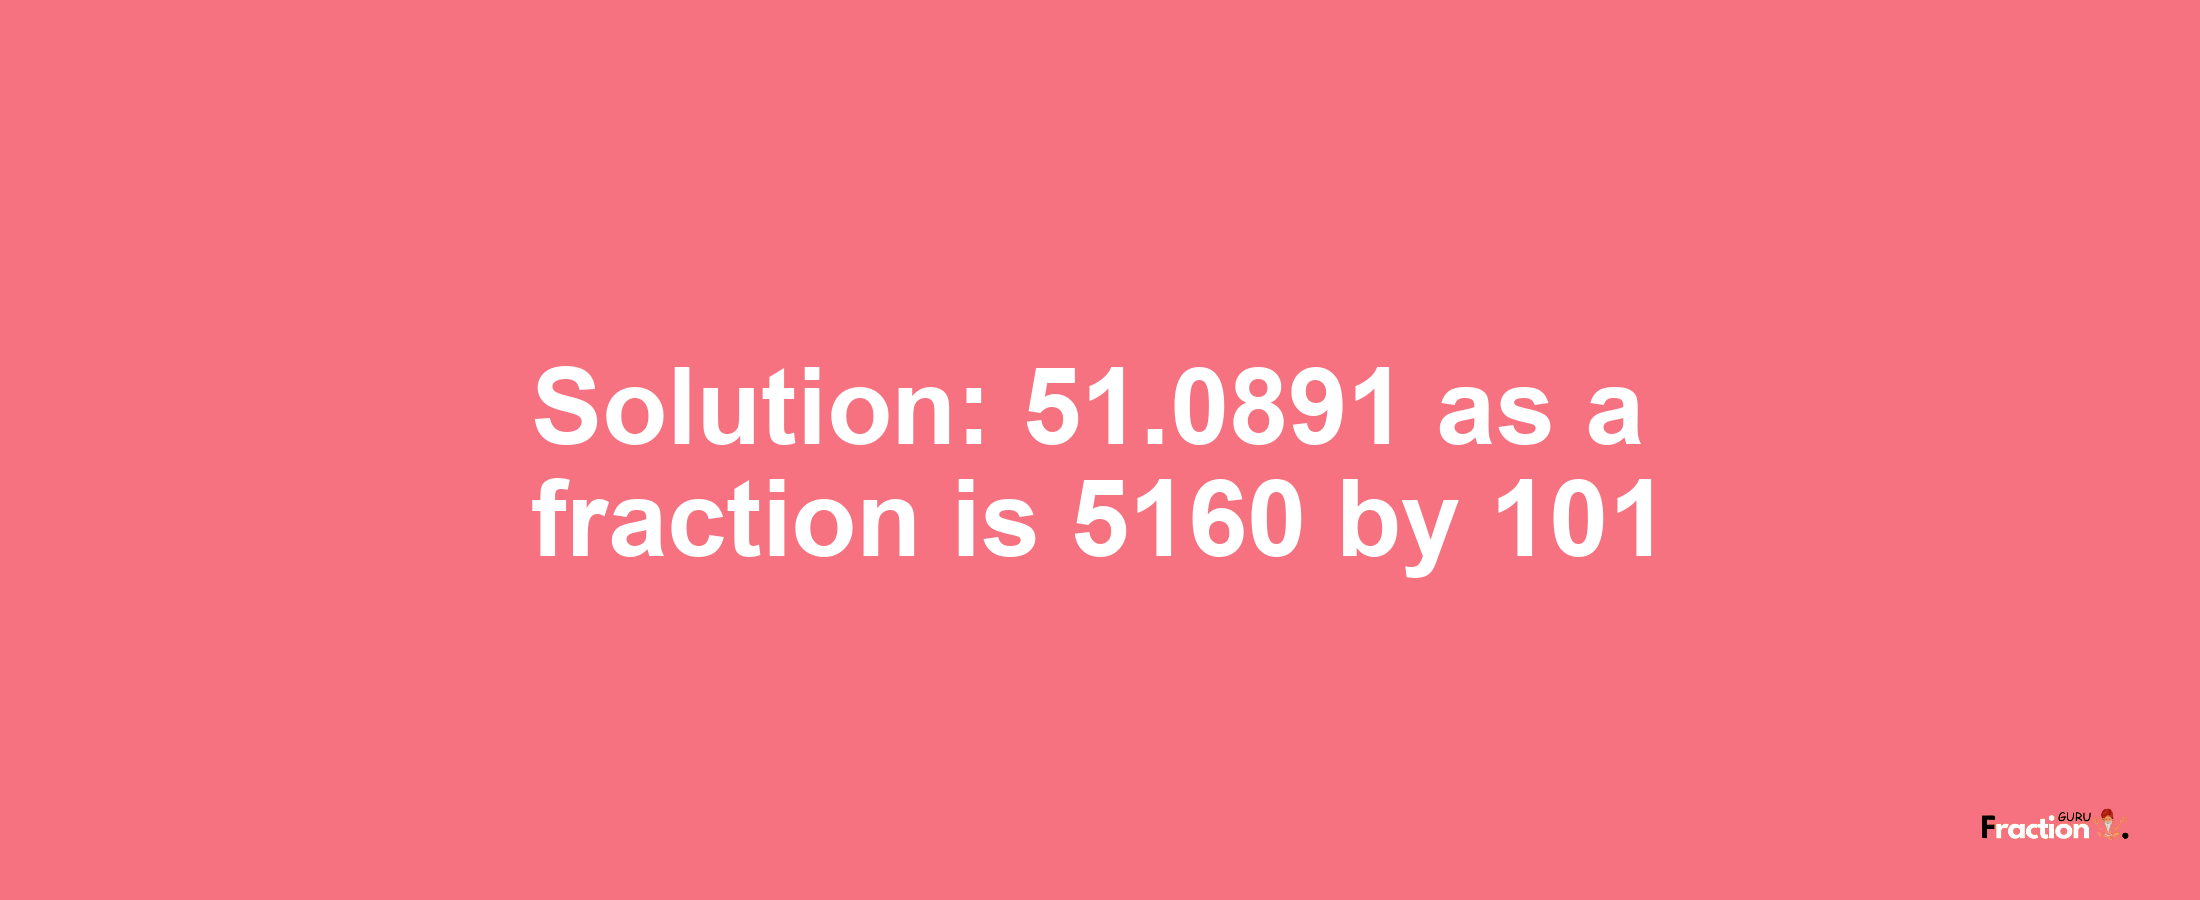 Solution:51.0891 as a fraction is 5160/101